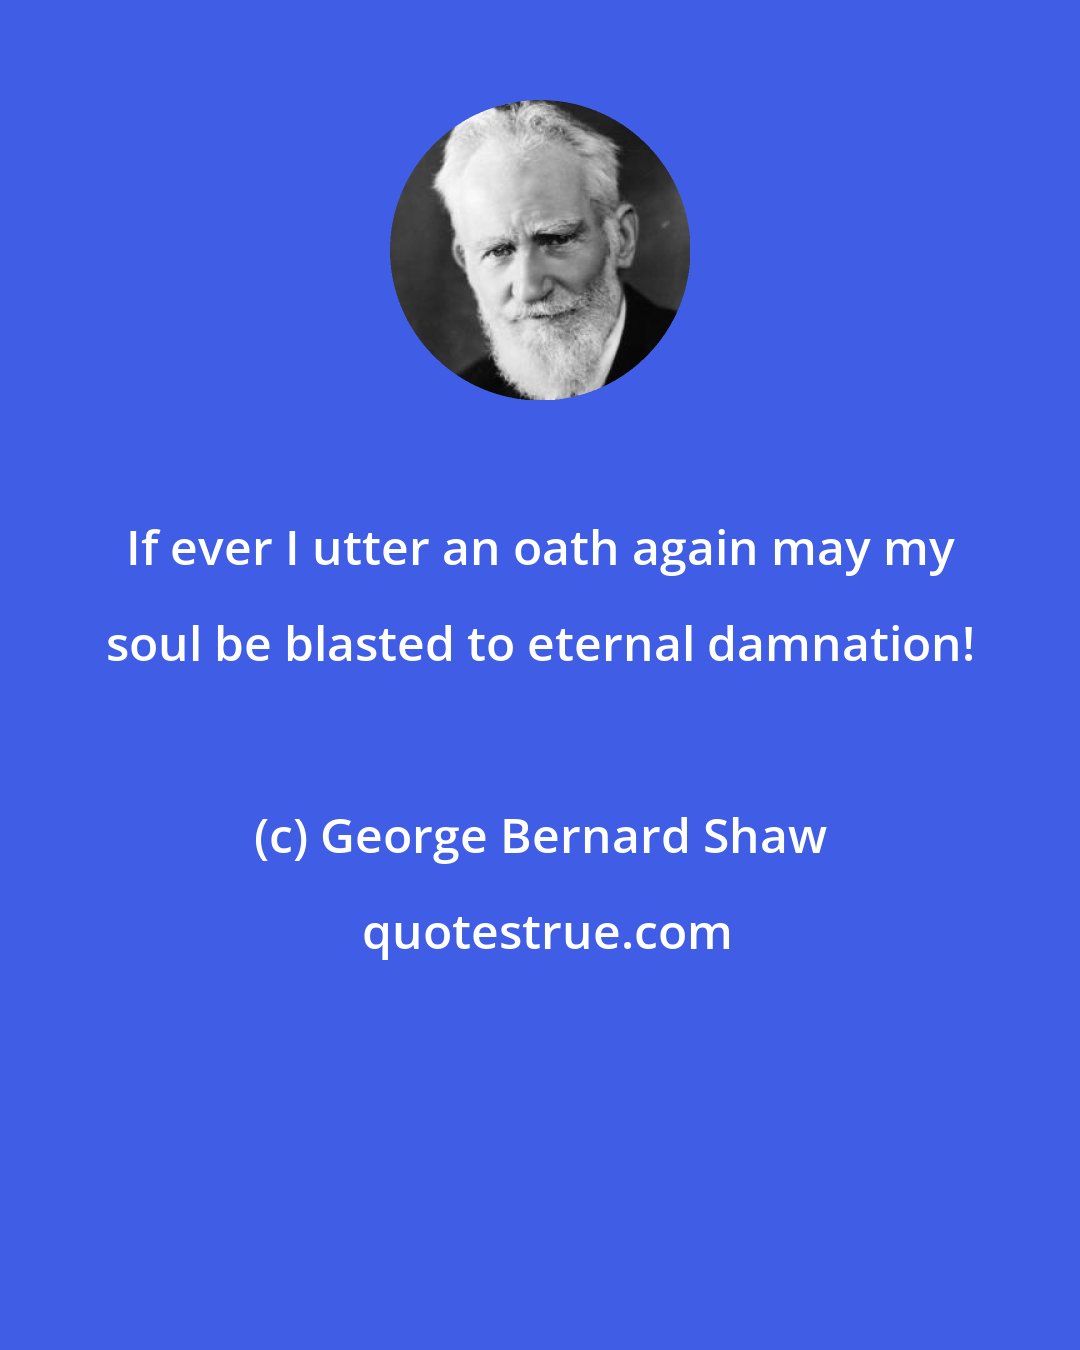 George Bernard Shaw: If ever I utter an oath again may my soul be blasted to eternal damnation!